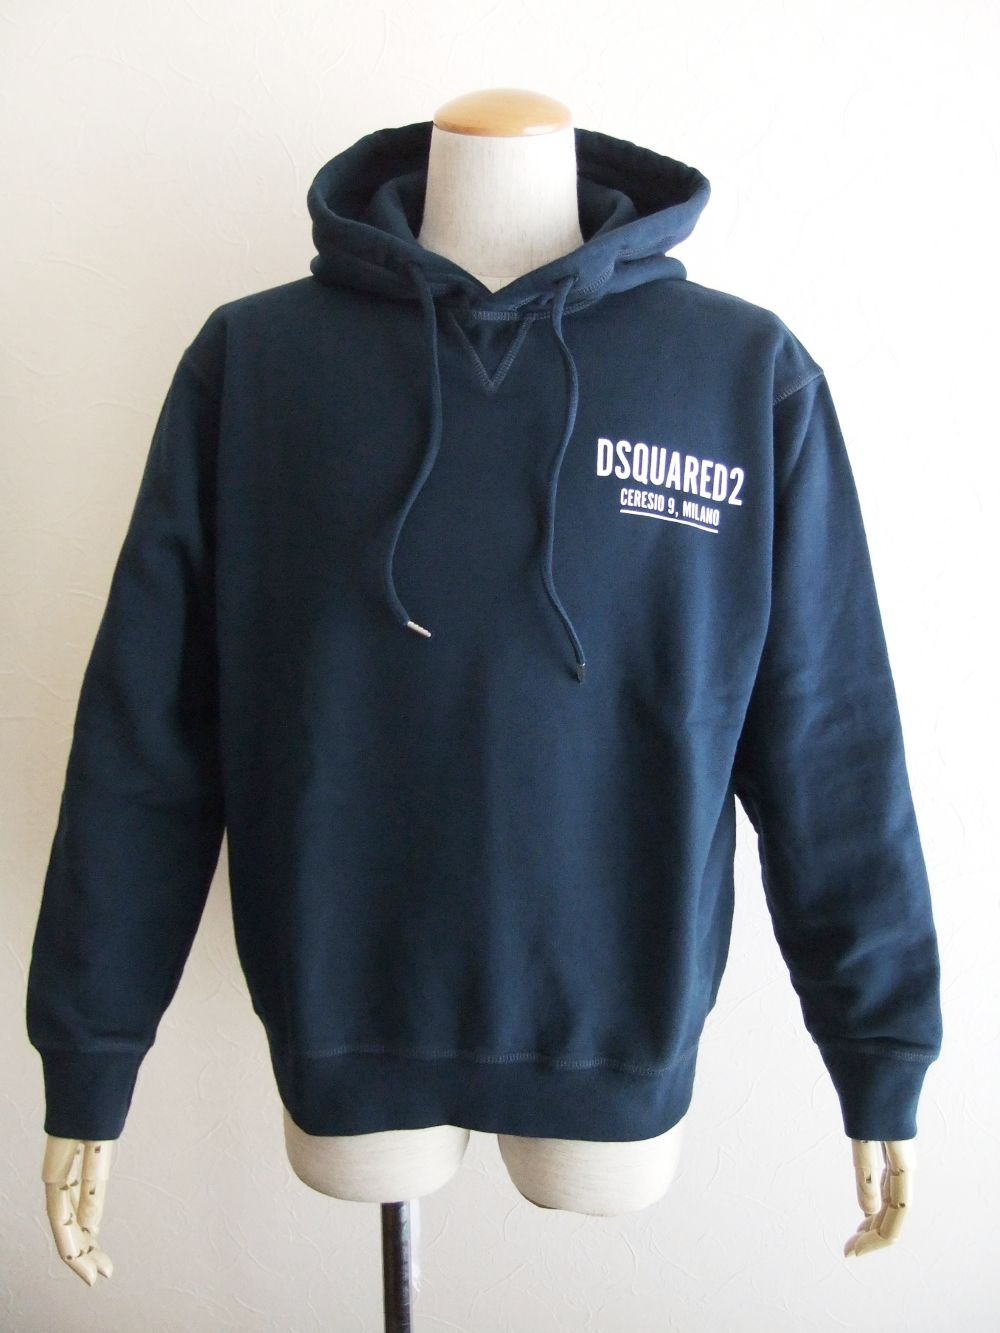 CERESIO9 COOL HOODIE ミニ ロゴ スウェット パーカー S71GU0451 - S